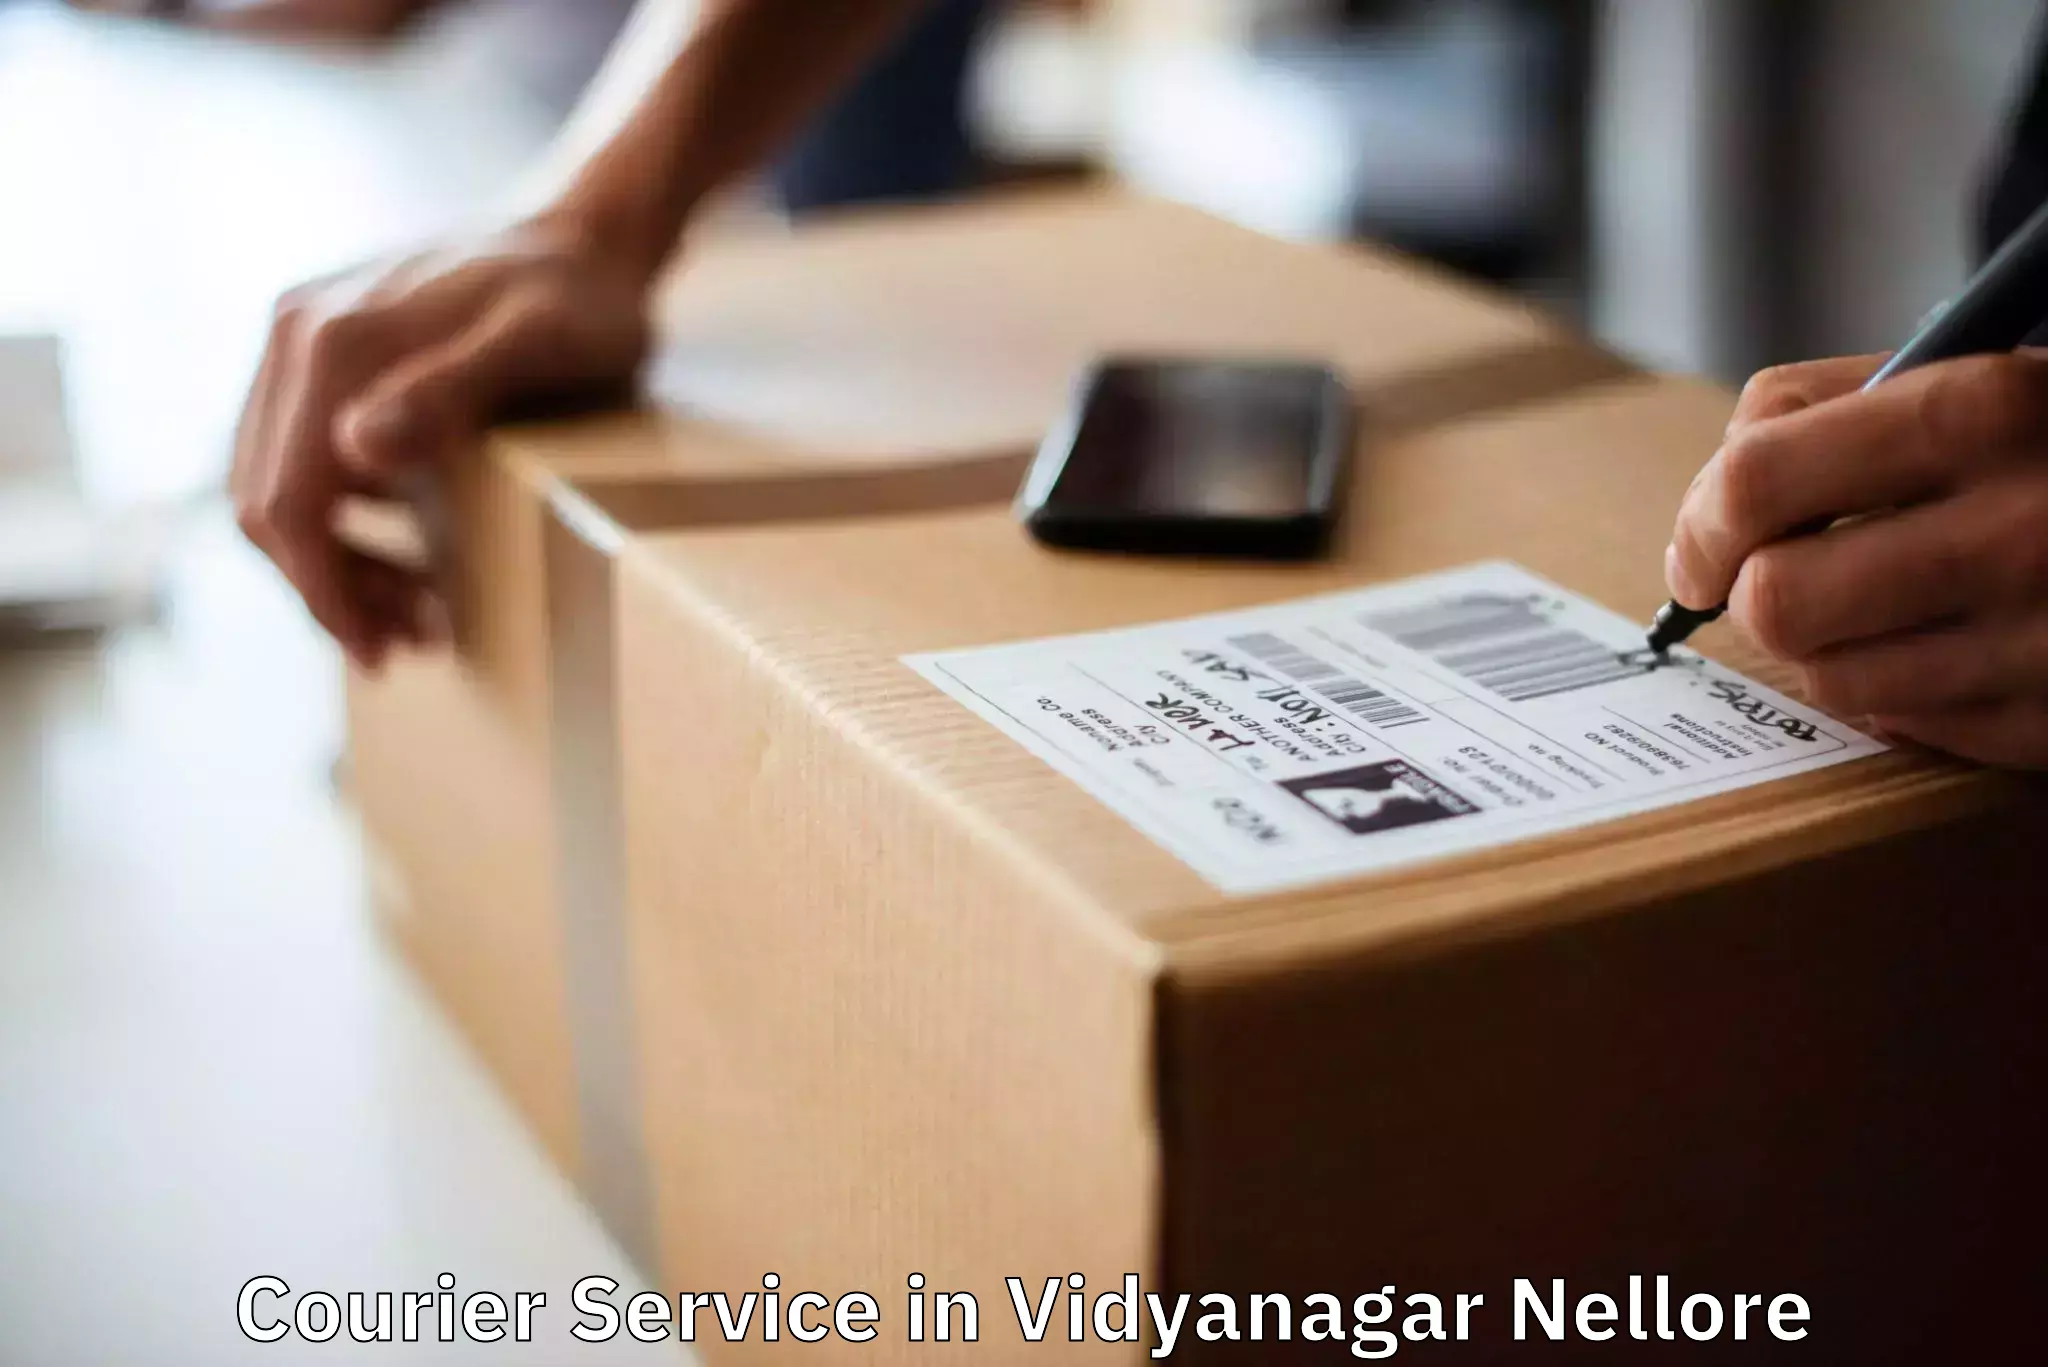 Enhanced delivery experience in Vidyanagar Nellore